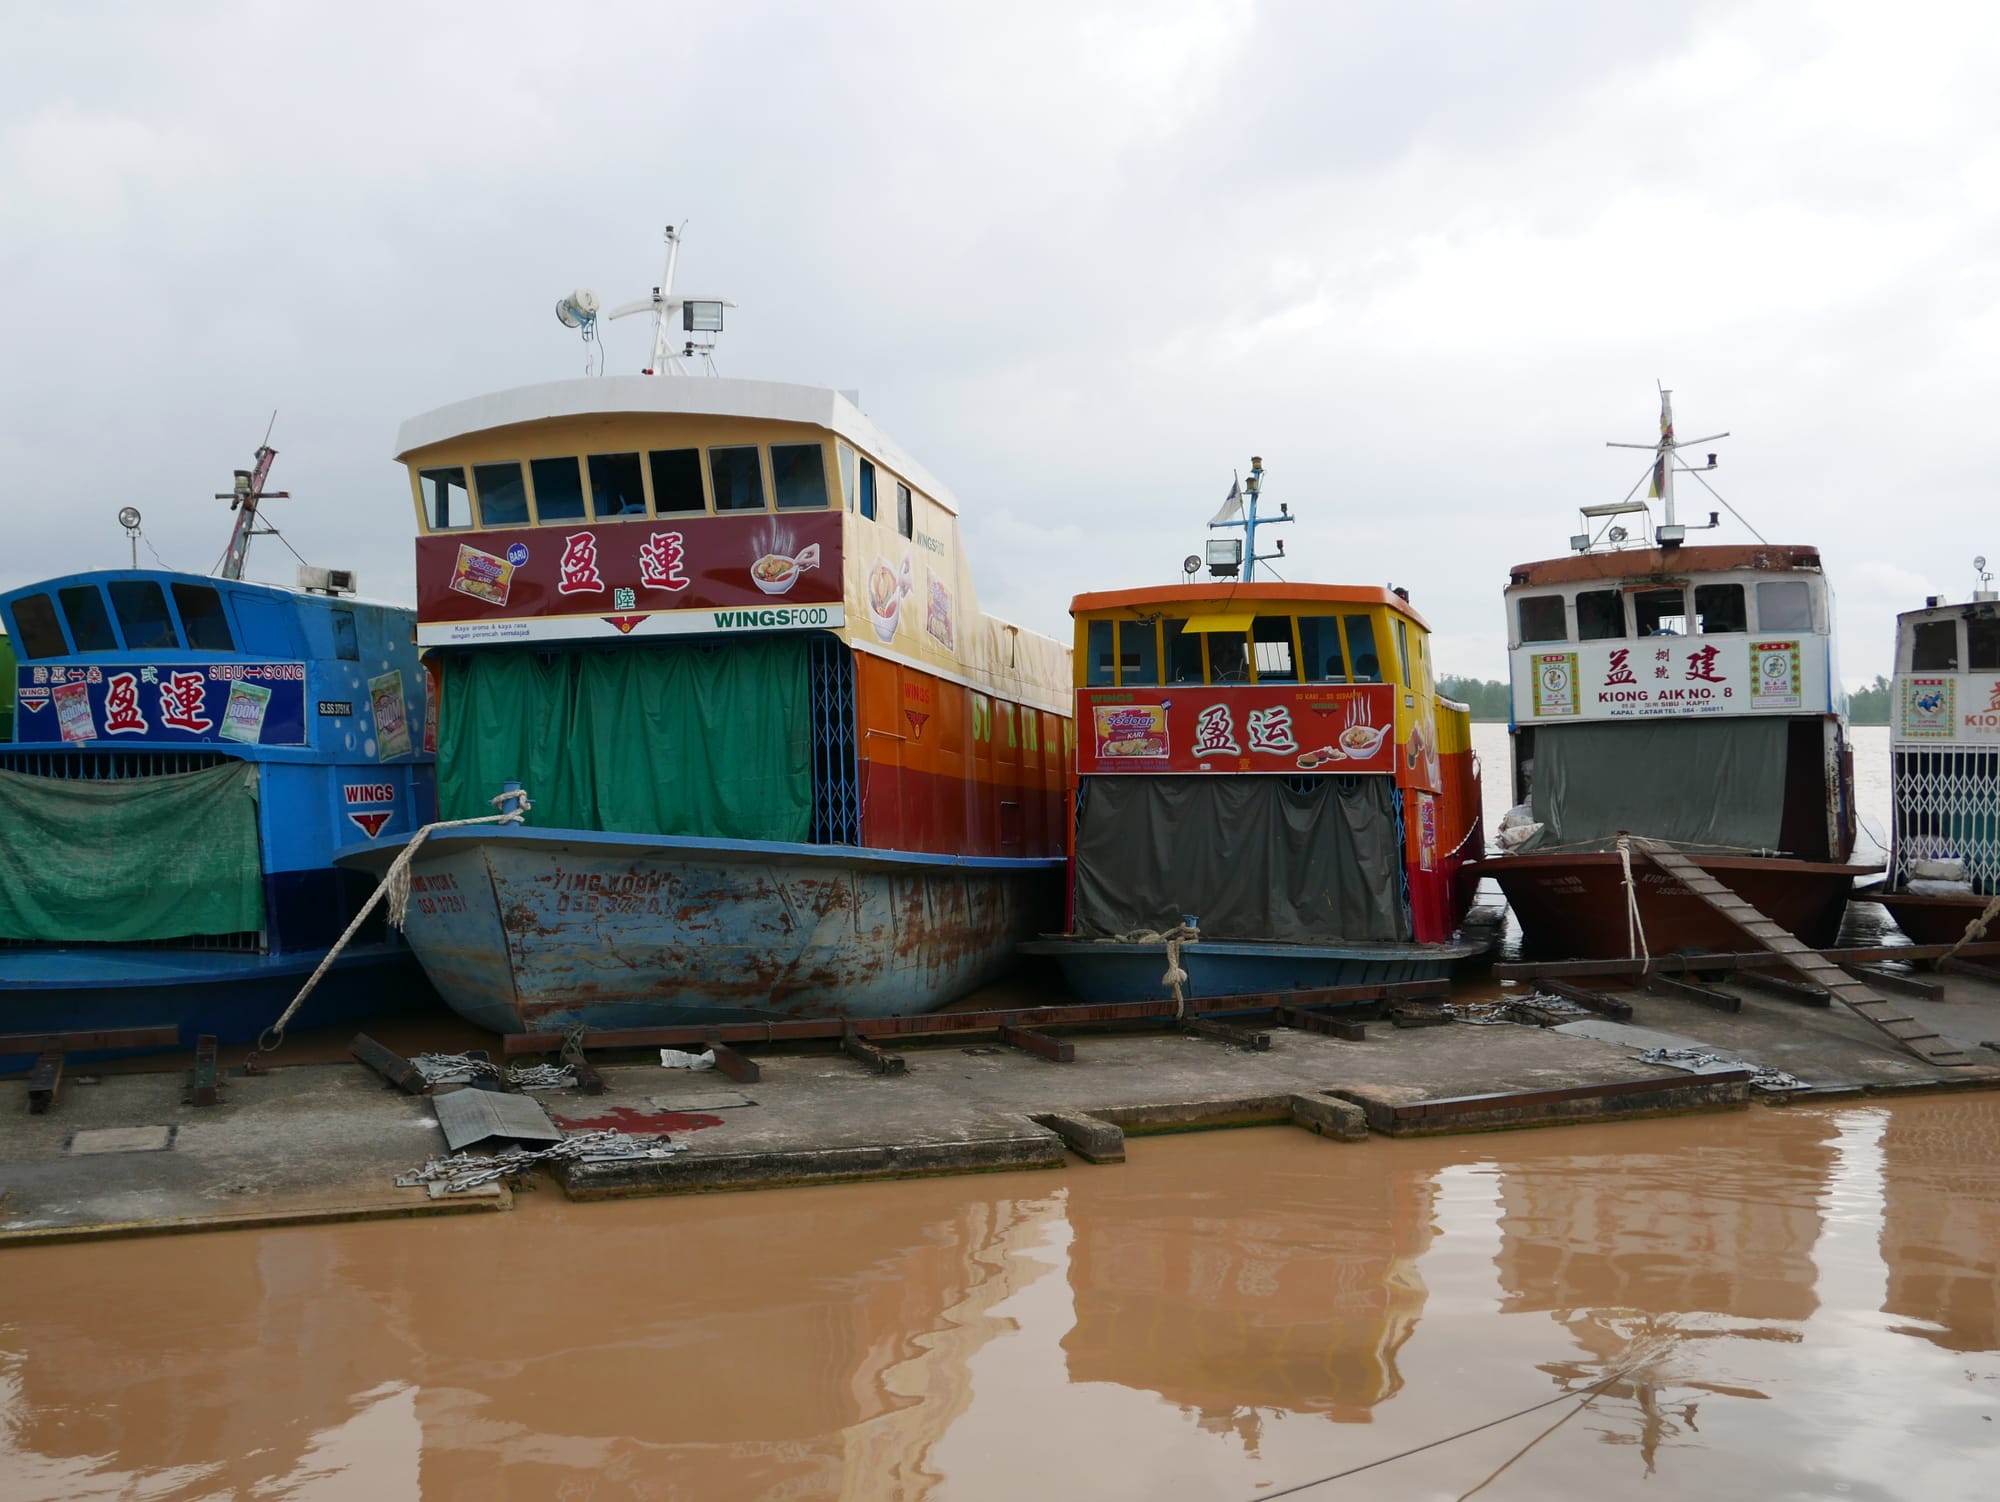 Photo by Author — the boats used to ship goods up the Rajang River